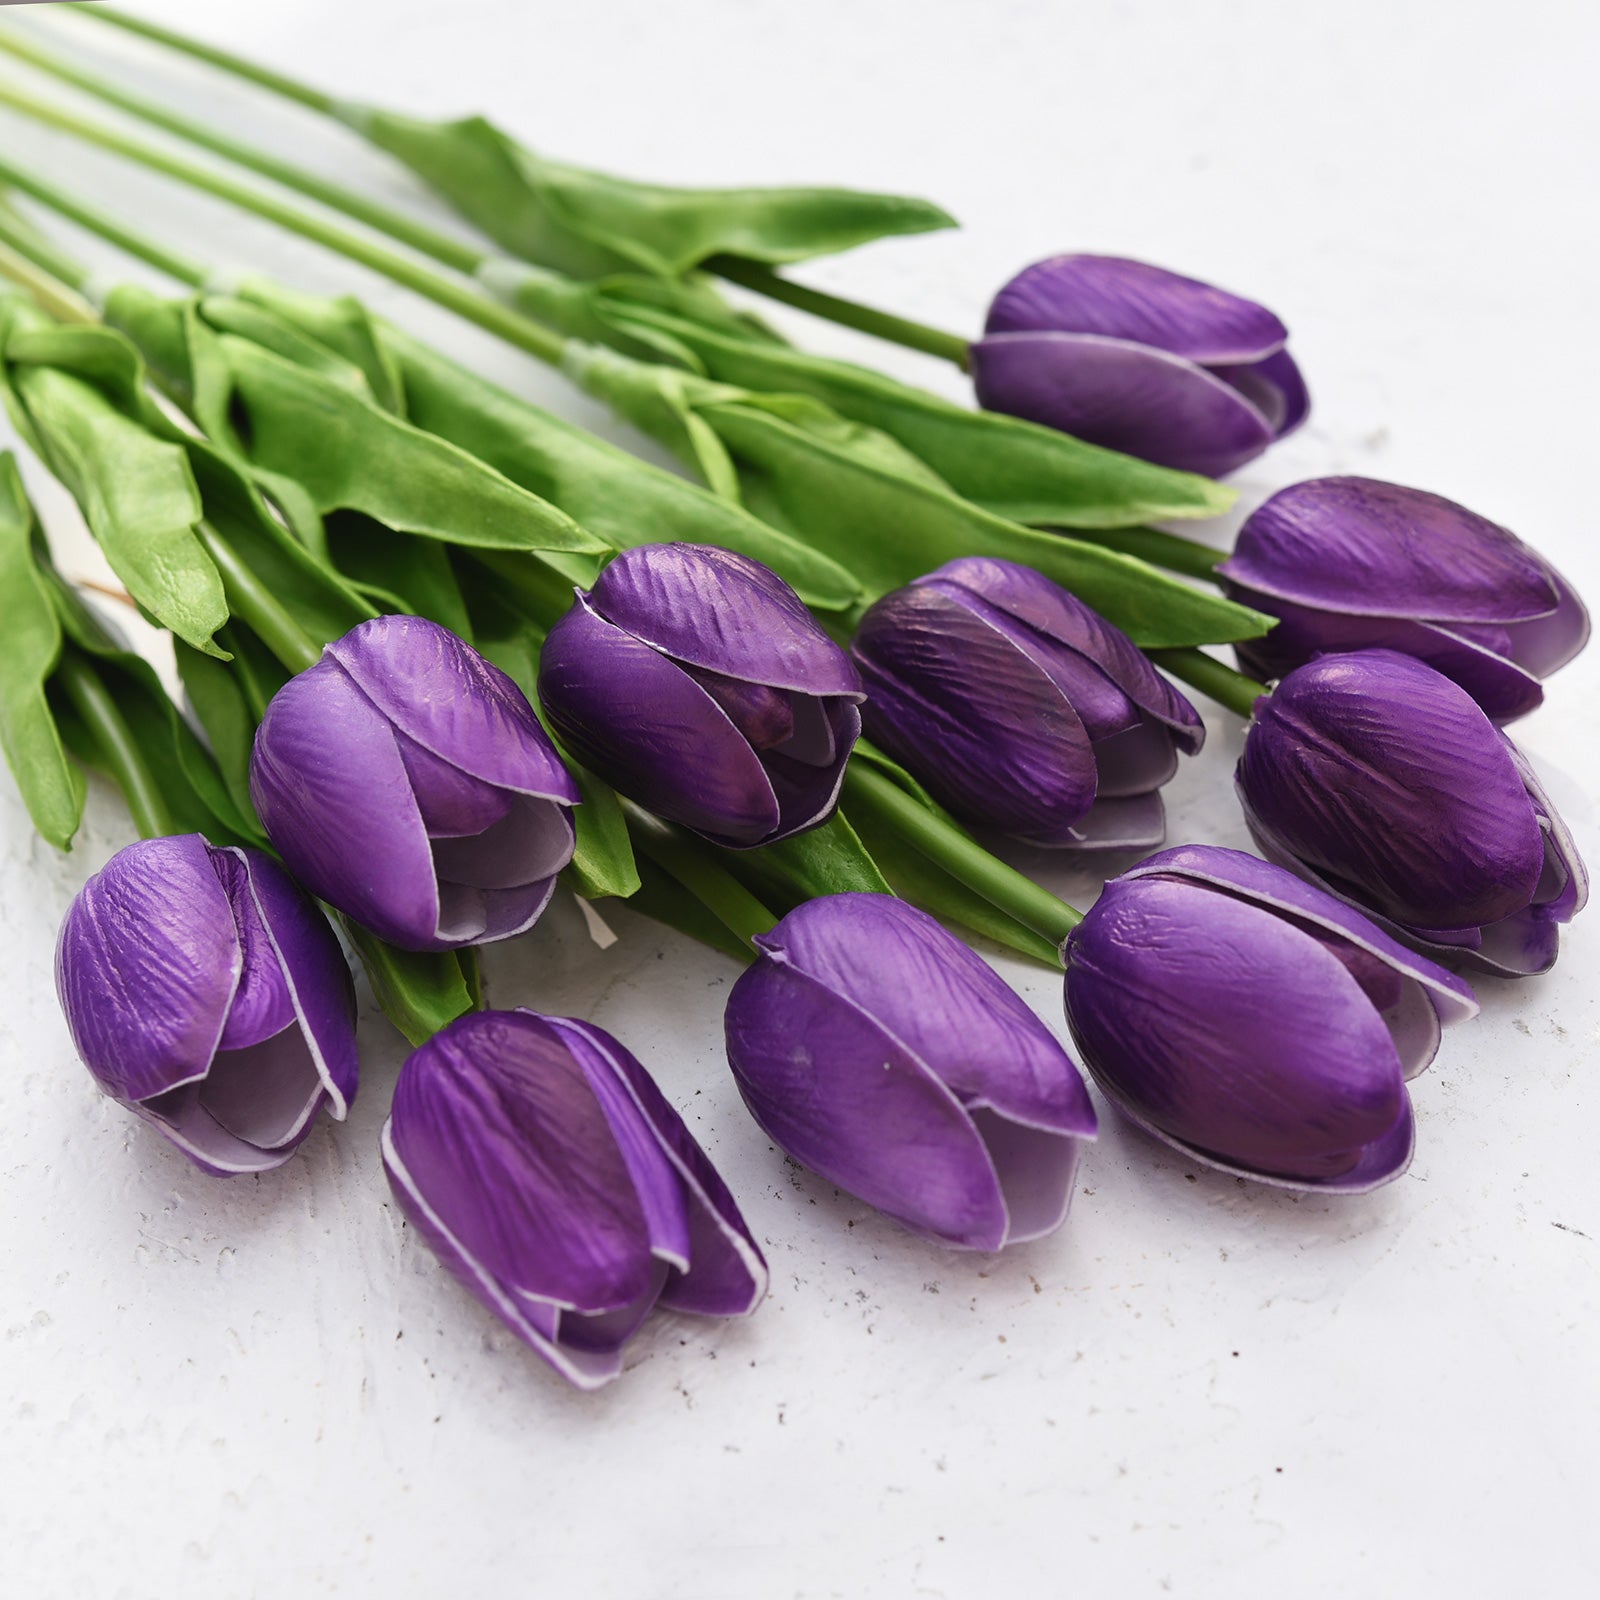 Purple Real Touch Tulips Artificial Flowers Bouquet 10 Stems